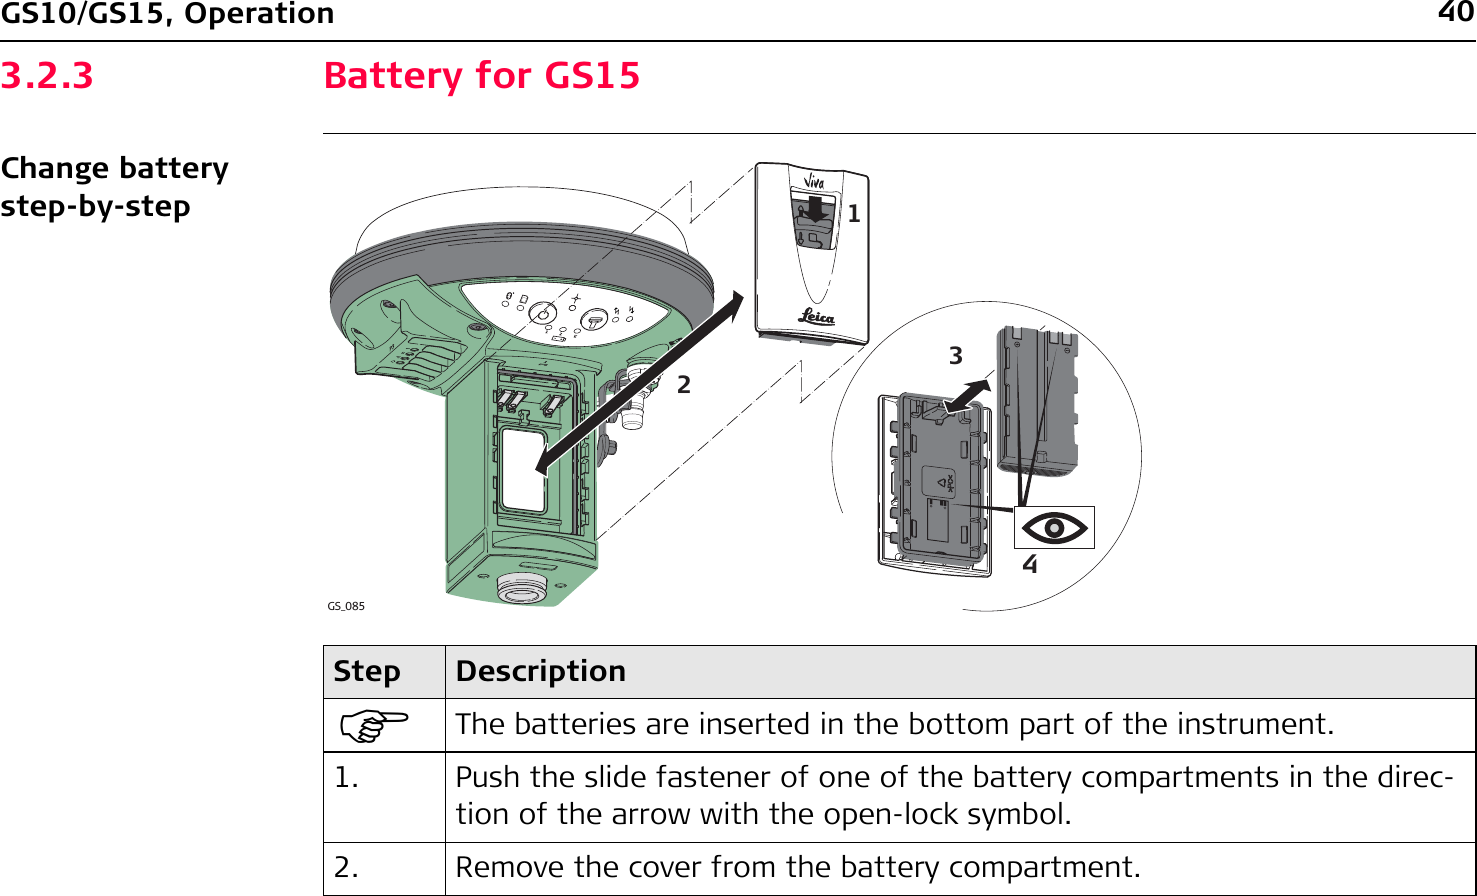 40GS10/GS15, Operation3.2.3 Battery for GS15Change battery step-by-stepStep Description)The batteries are inserted in the bottom part of the instrument.1. Push the slide fastener of one of the battery compartments in the direc-tion of the arrow with the open-lock symbol.2. Remove the cover from the battery compartment.GS_0851234